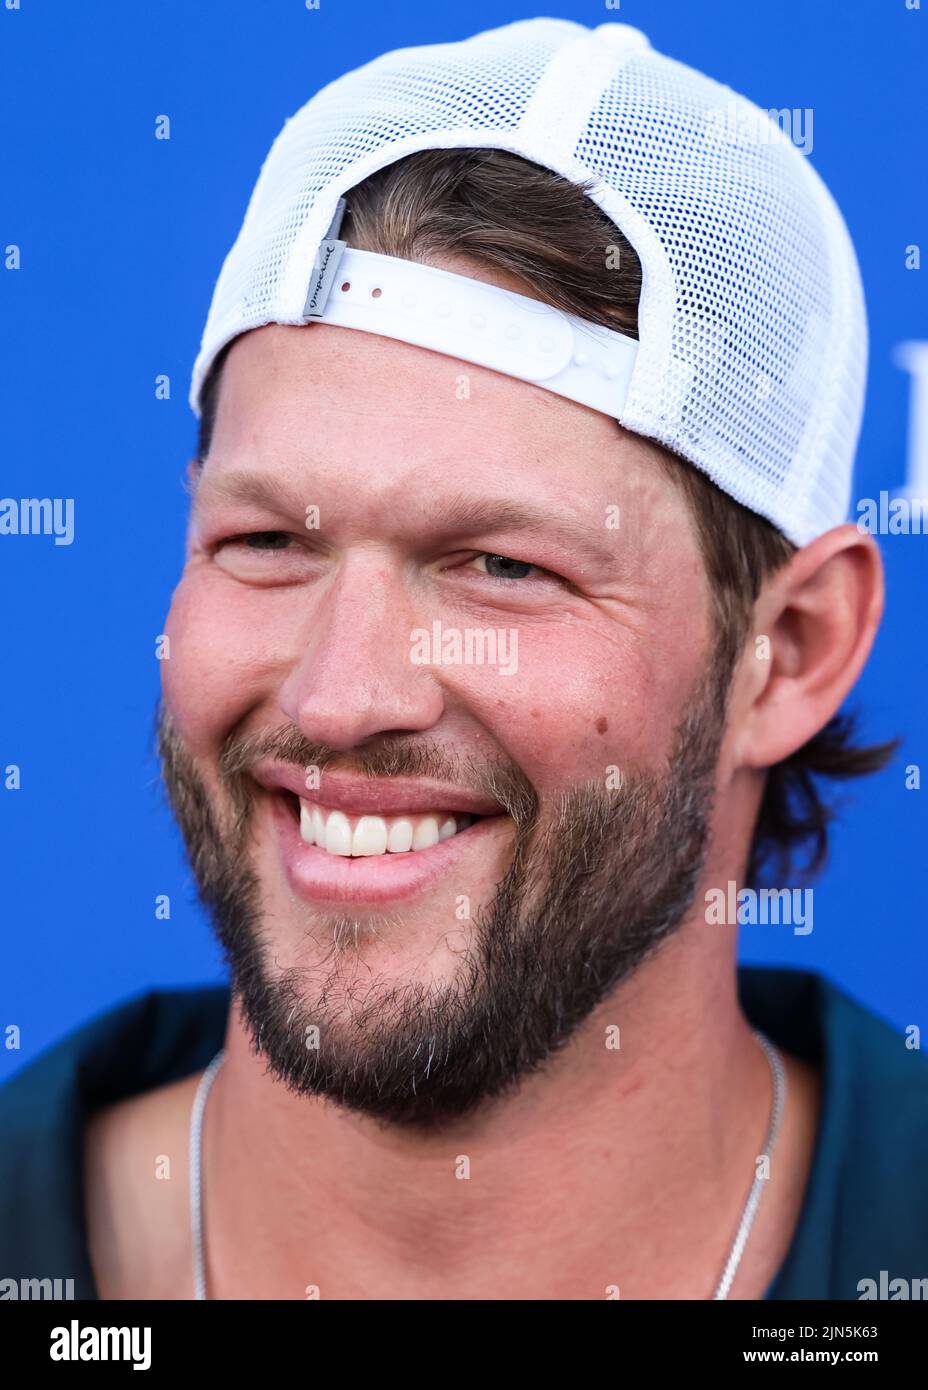 ELYSIAN PARK, LOS ANGELES, CALIFORNIA, USA - AUGUST 08: American professional baseball pitcher for the Los Angeles Dodgers of Major League Baseball Clayton Kershaw arrives at Kershaw's Challenge Ping Pong 4 Purpose 2022 held at Dodger Stadium on August 8, 2022 in Elysian Park, Los Angeles, California, United States. (Photo by Xavier Collin/Image Press Agency) Stock Photo